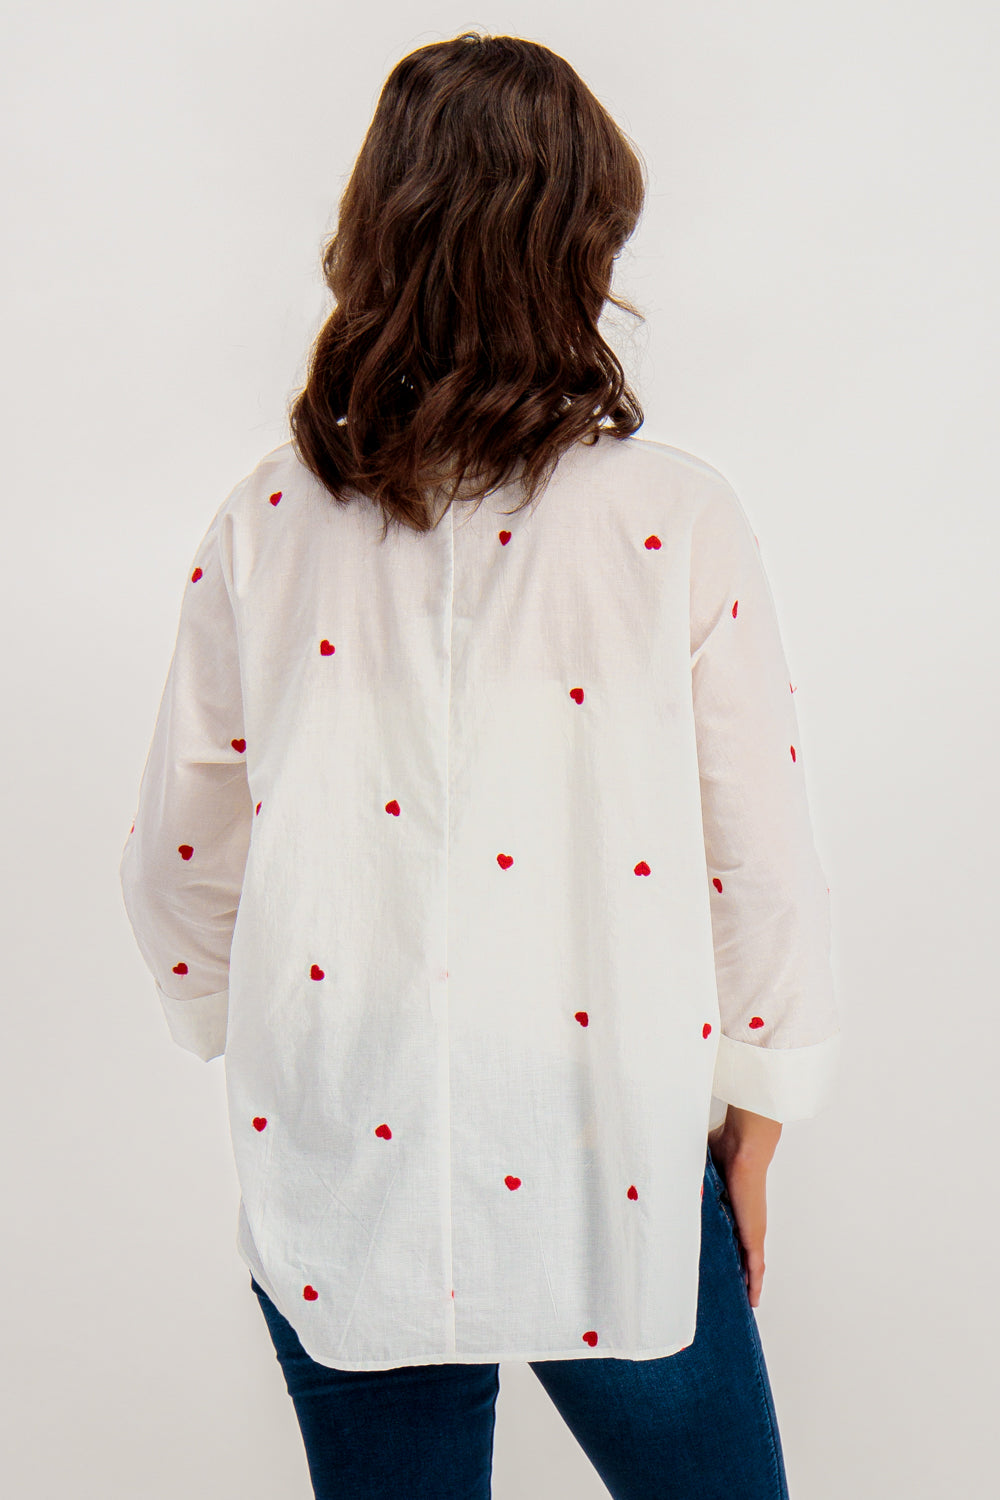 Lina Grace Embroidered Heart Shirt